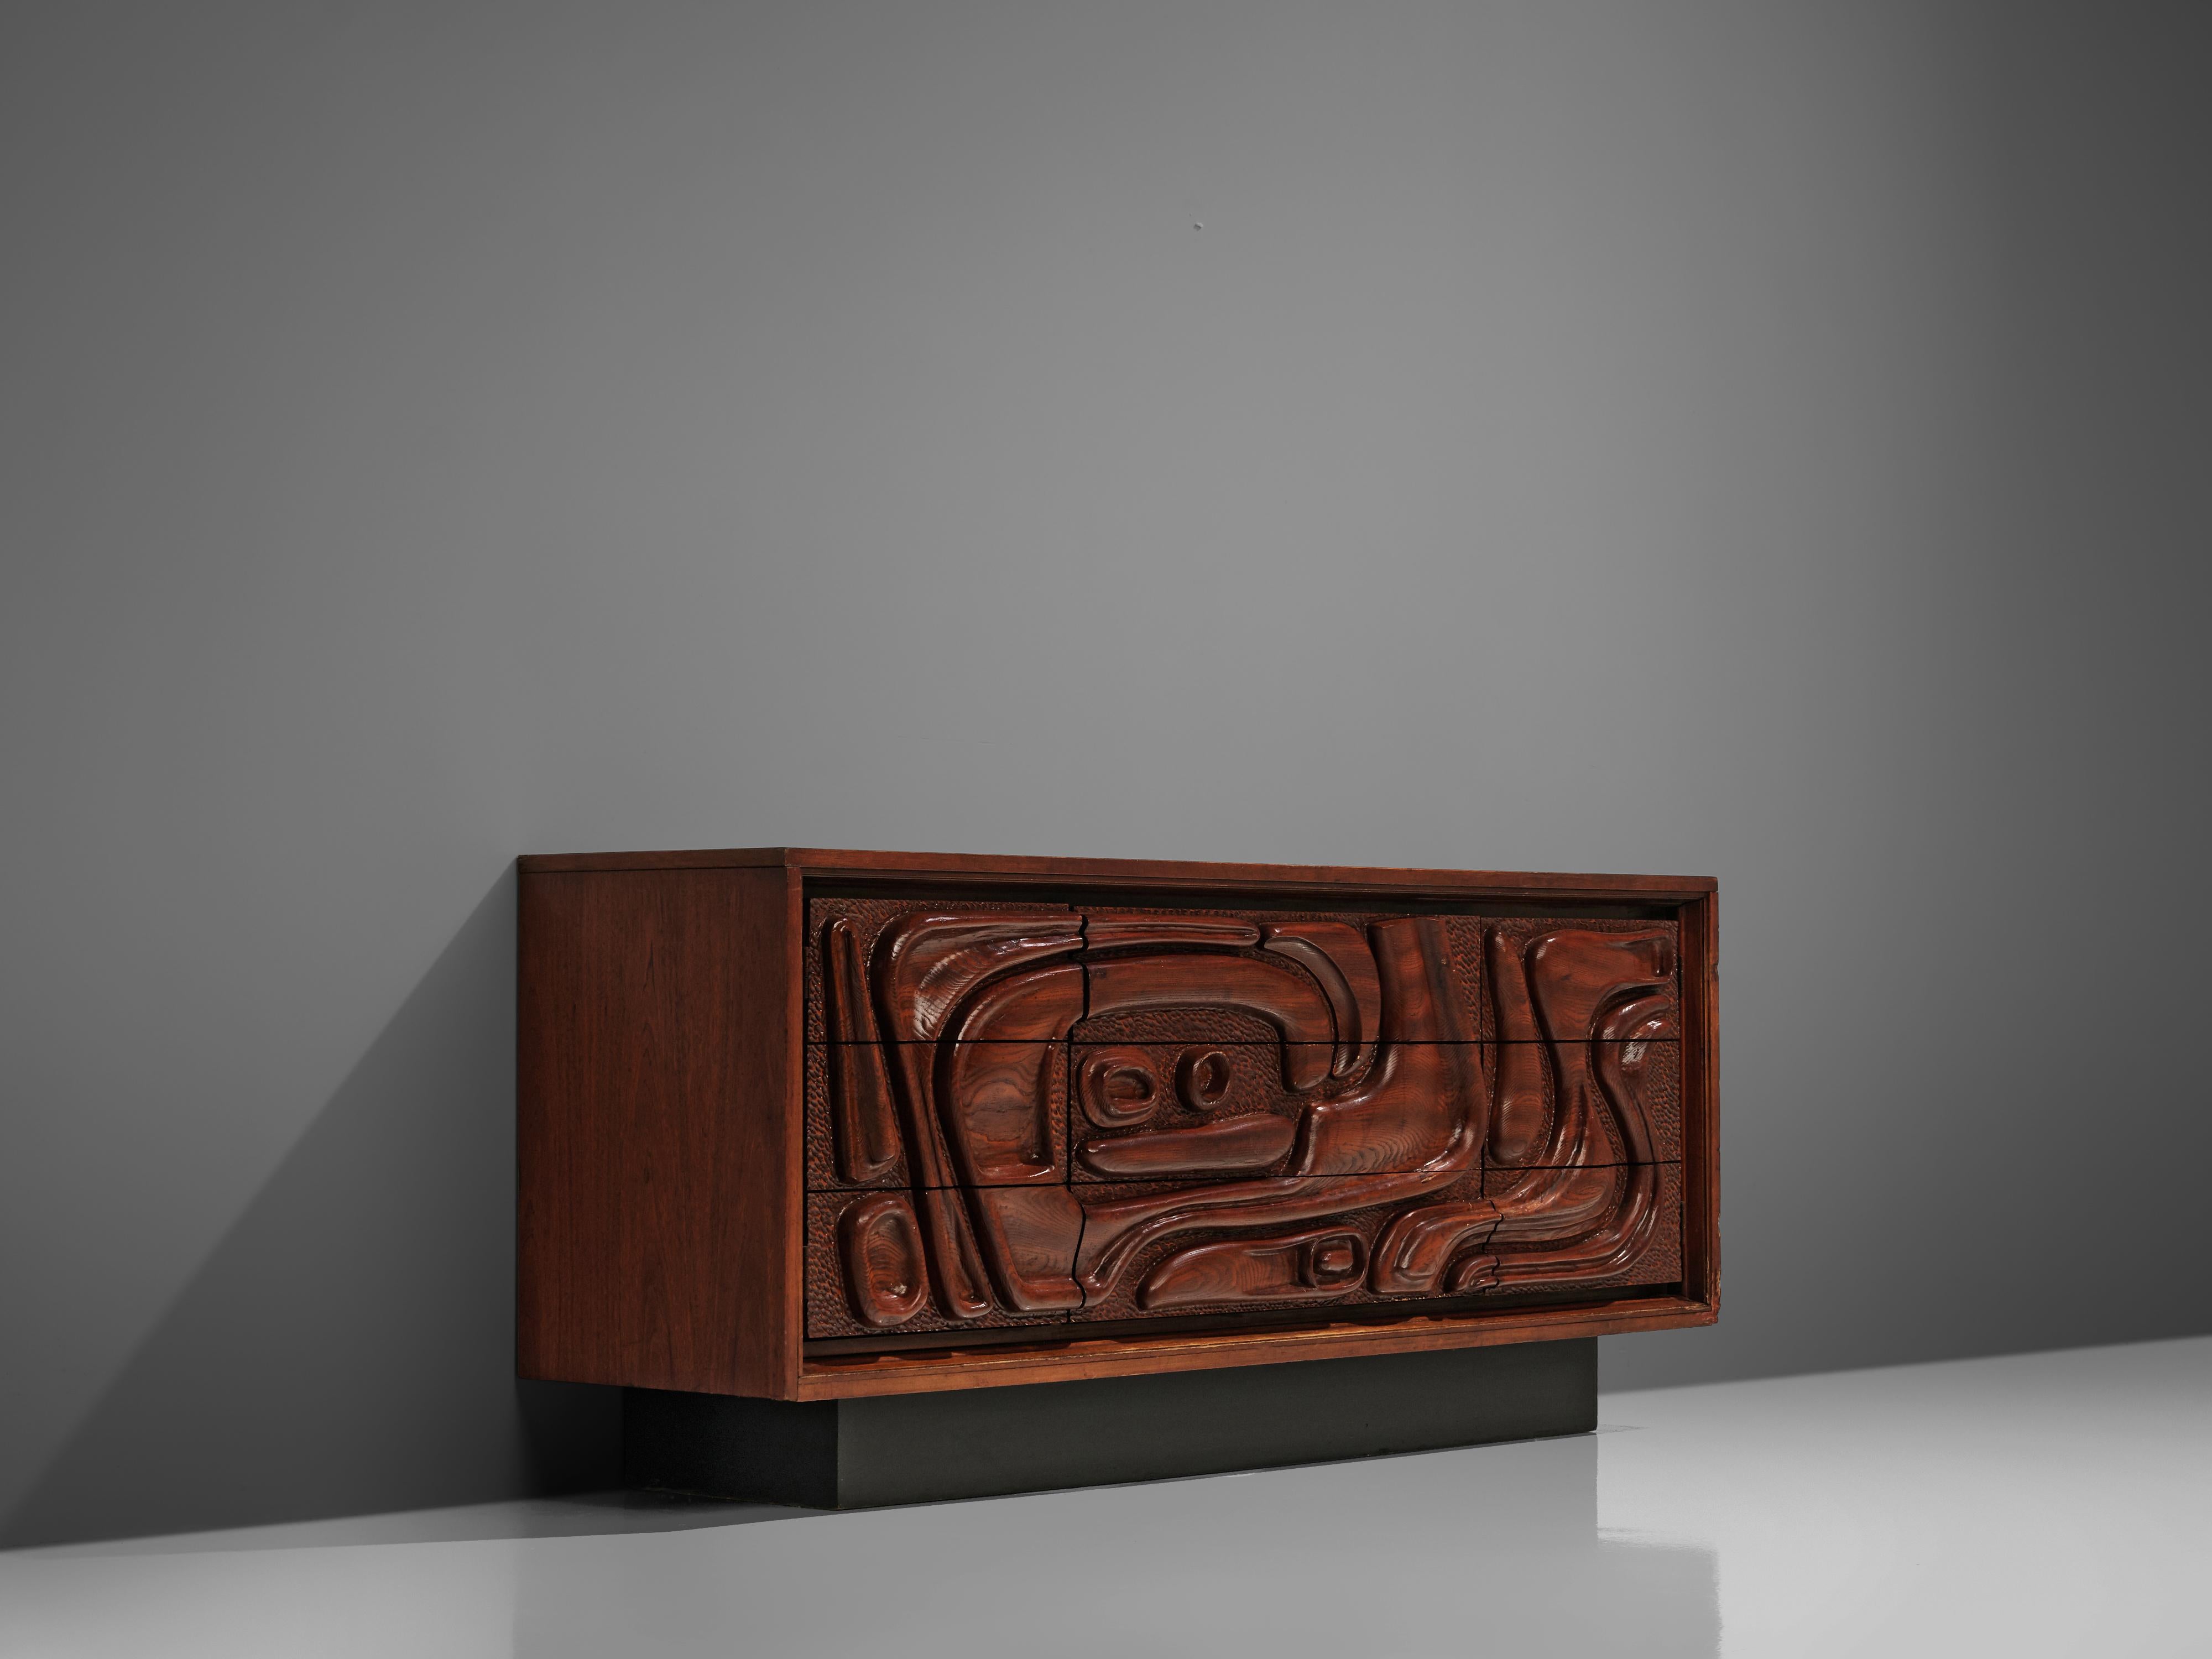 Pulaski Furniture Corporation, sideboard, walnut, facade, United States, 1960s

A carved cabinet in walnut by Pulaski Furniture Corporation. The wildly carved front shows an organic, tribal inspired relief. A squares base lifts the sideboard up.